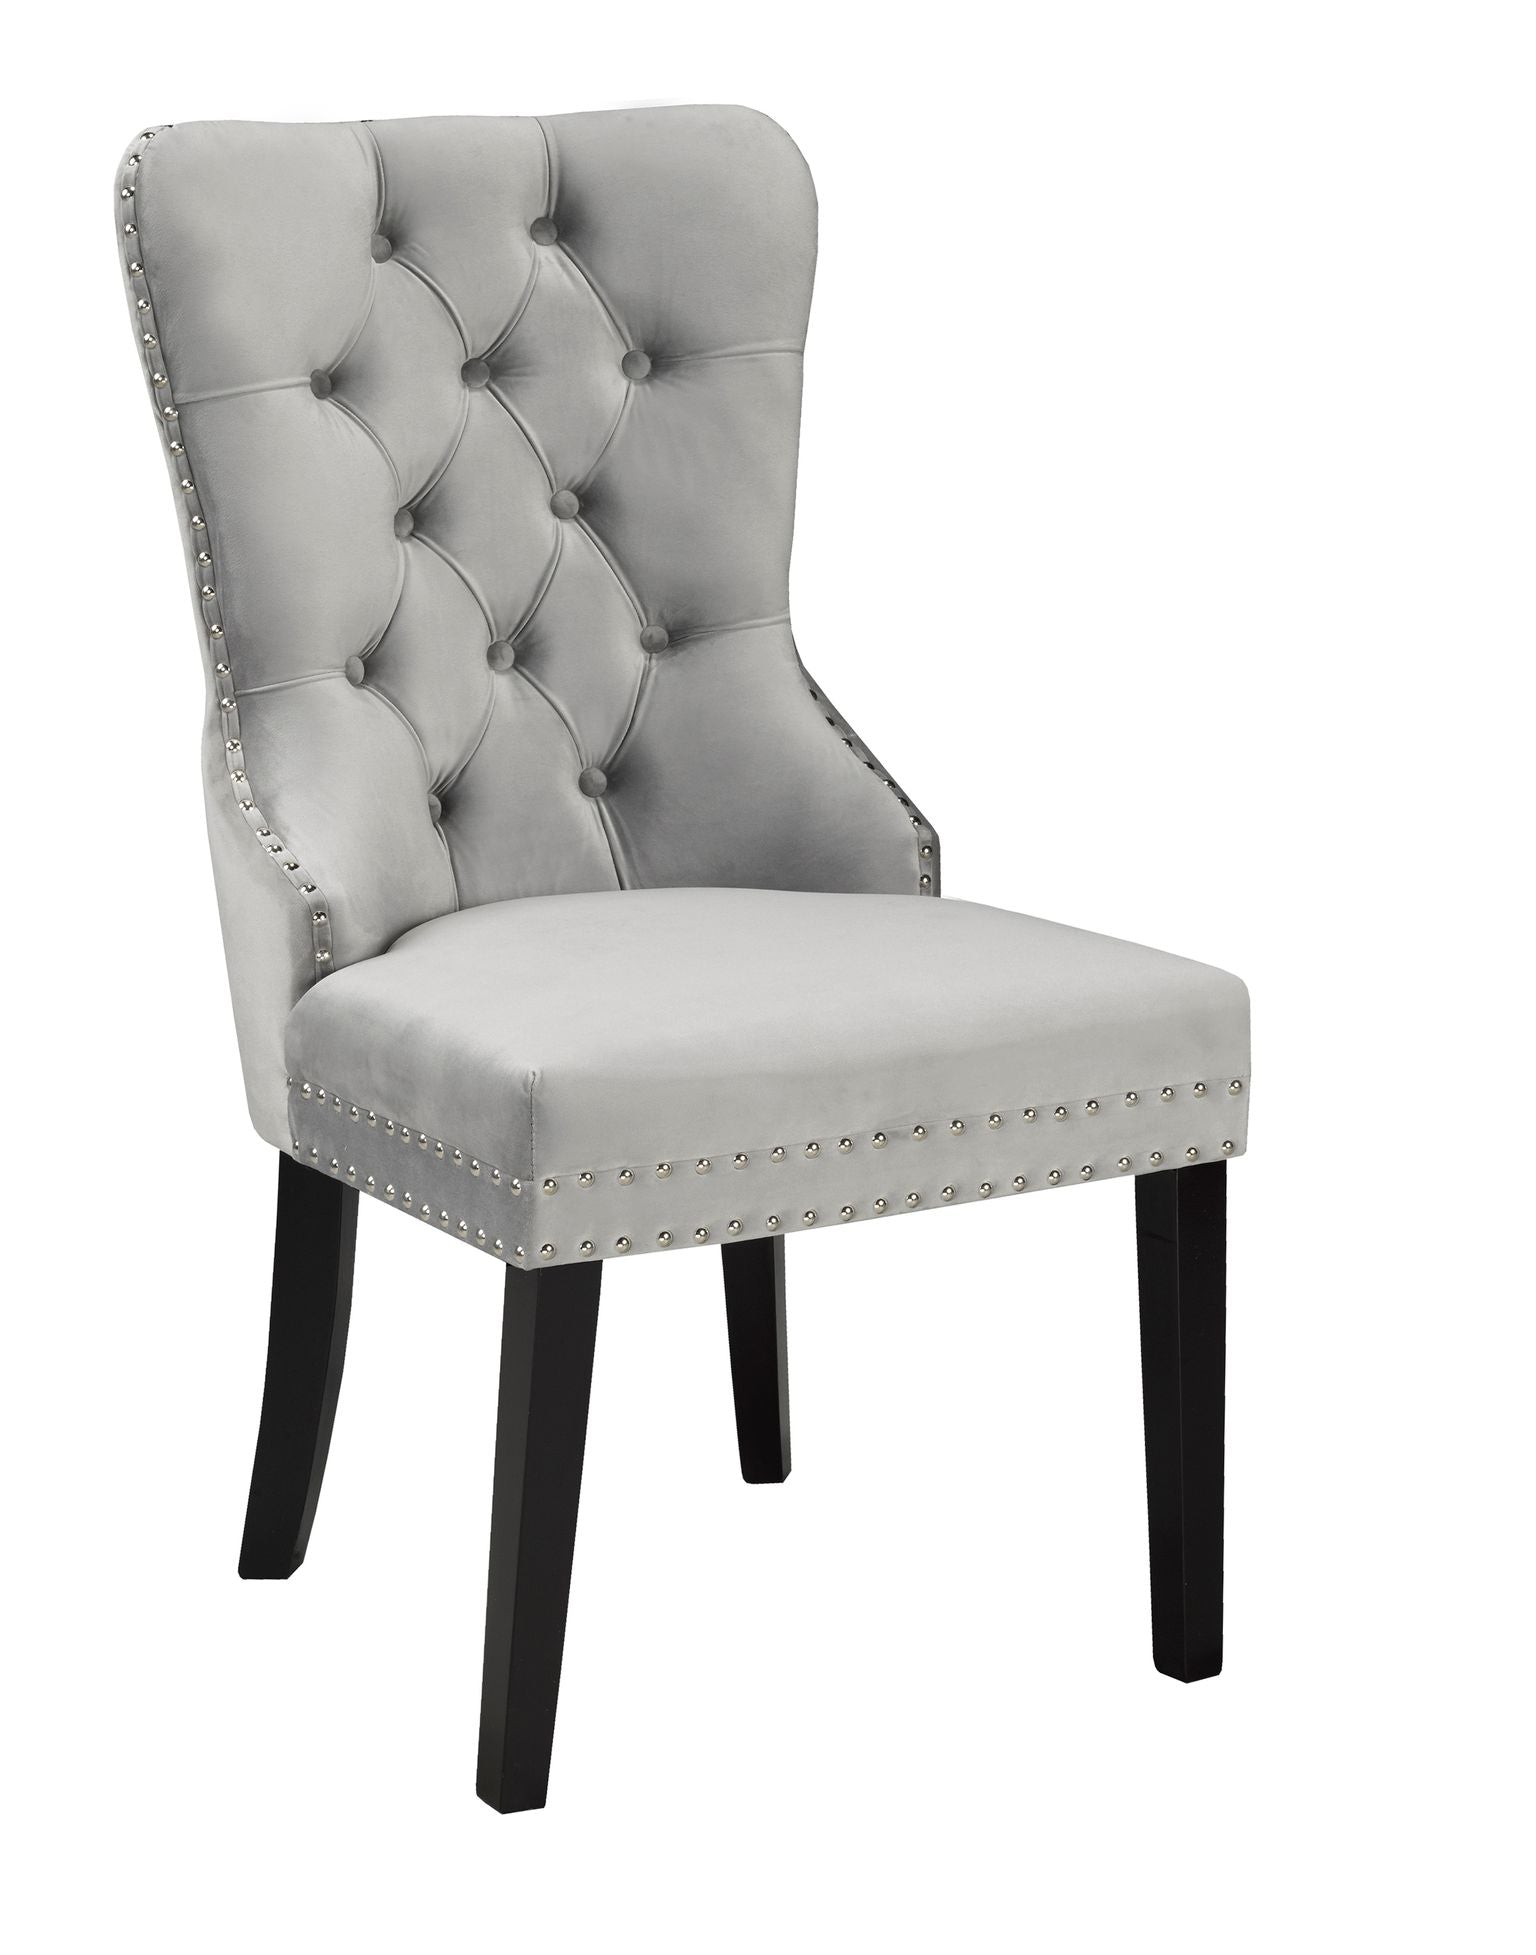 Grey Dining Chair F-450 GY (Set of 2)